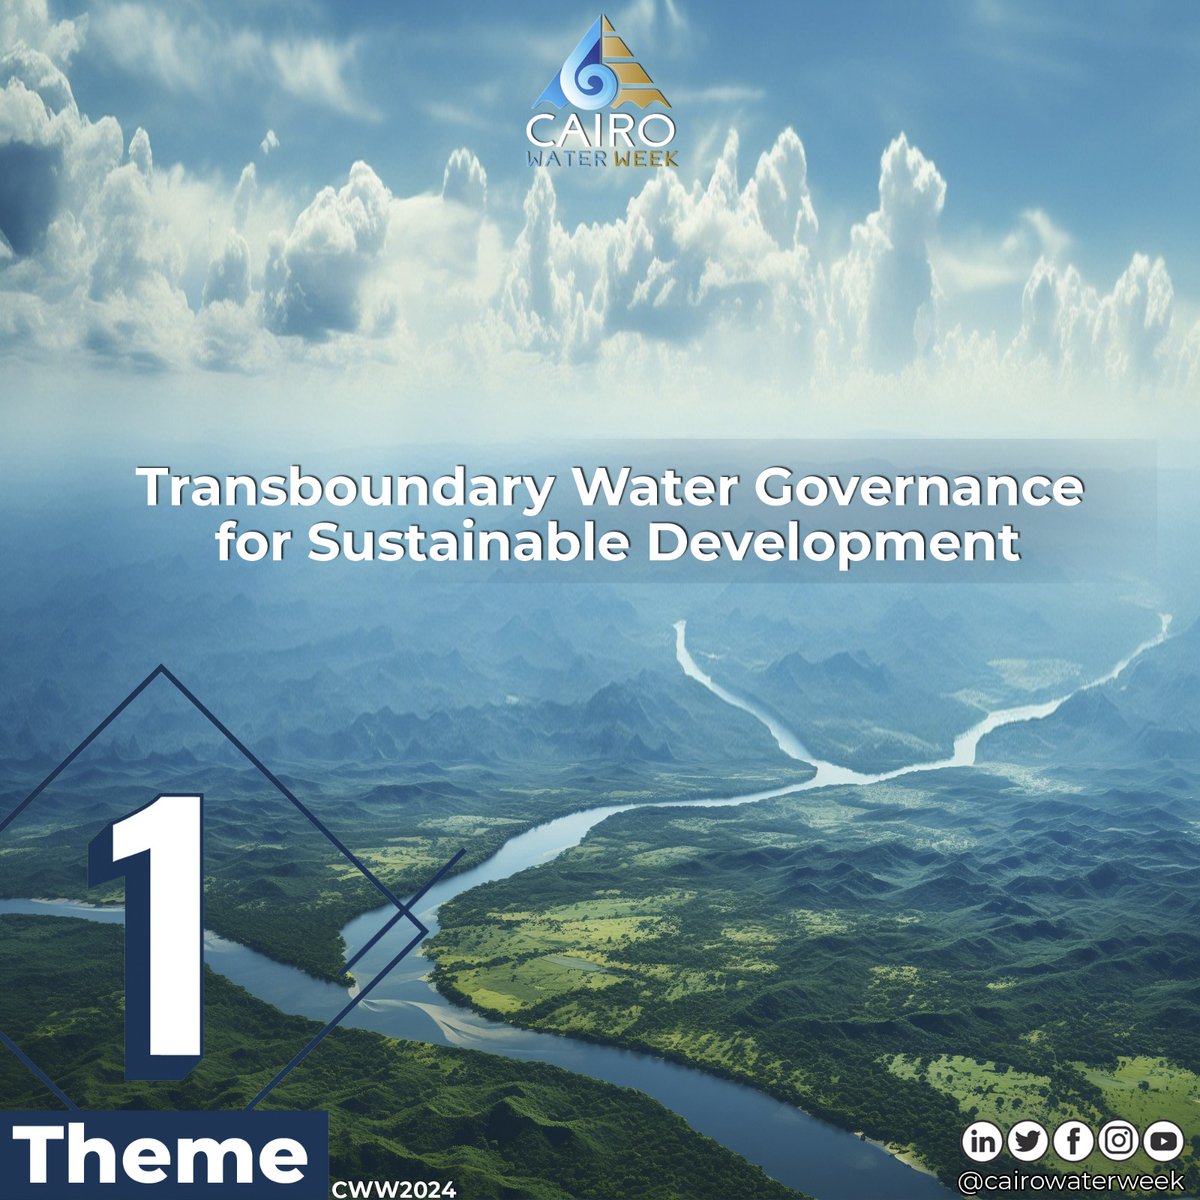 📷 *Cairo Water Week 2024: Uniting for Water Beyond Borders* 📷 Embark on a journey of unity at Cairo Water Week 2024, where our first main theme, 'Transboundary Water Governance for Sustainable Development,' cairowaterweek.eg/theme-1/ Let's ripple the waters of change together!